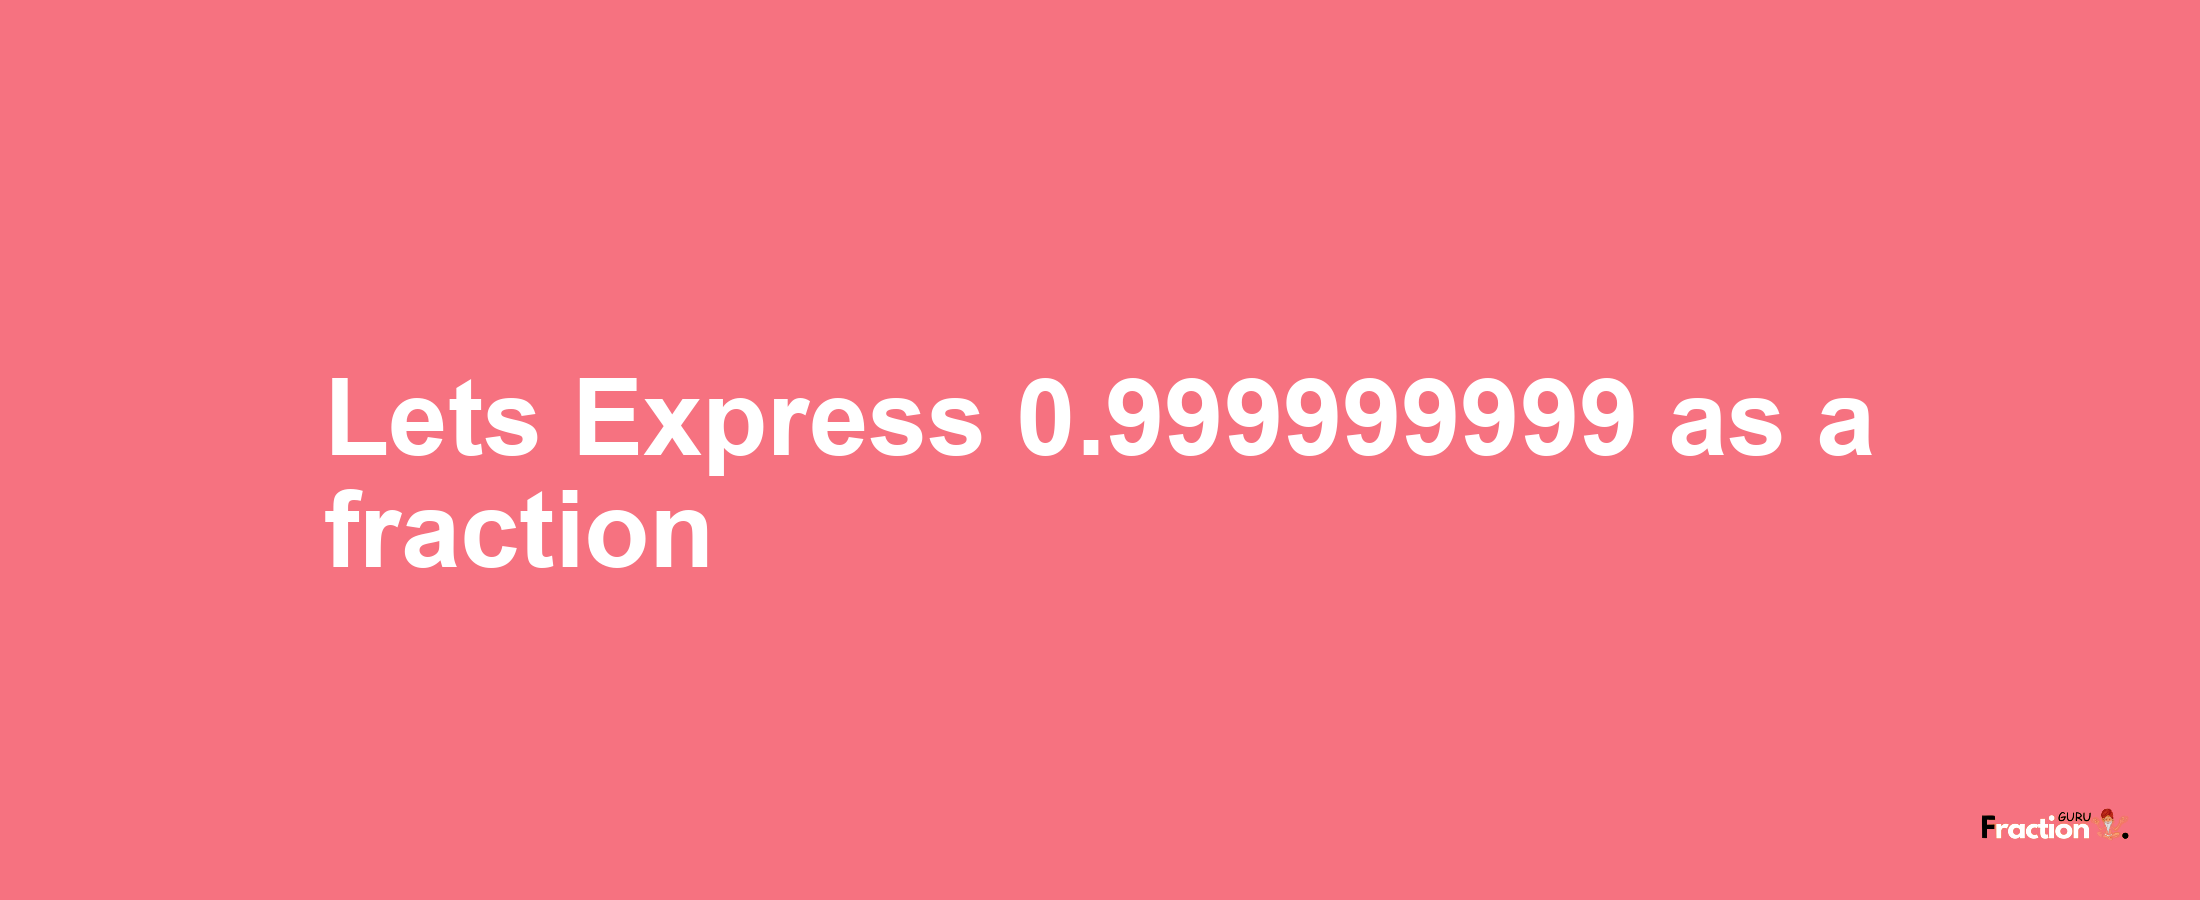 Lets Express 0.999999999 as afraction